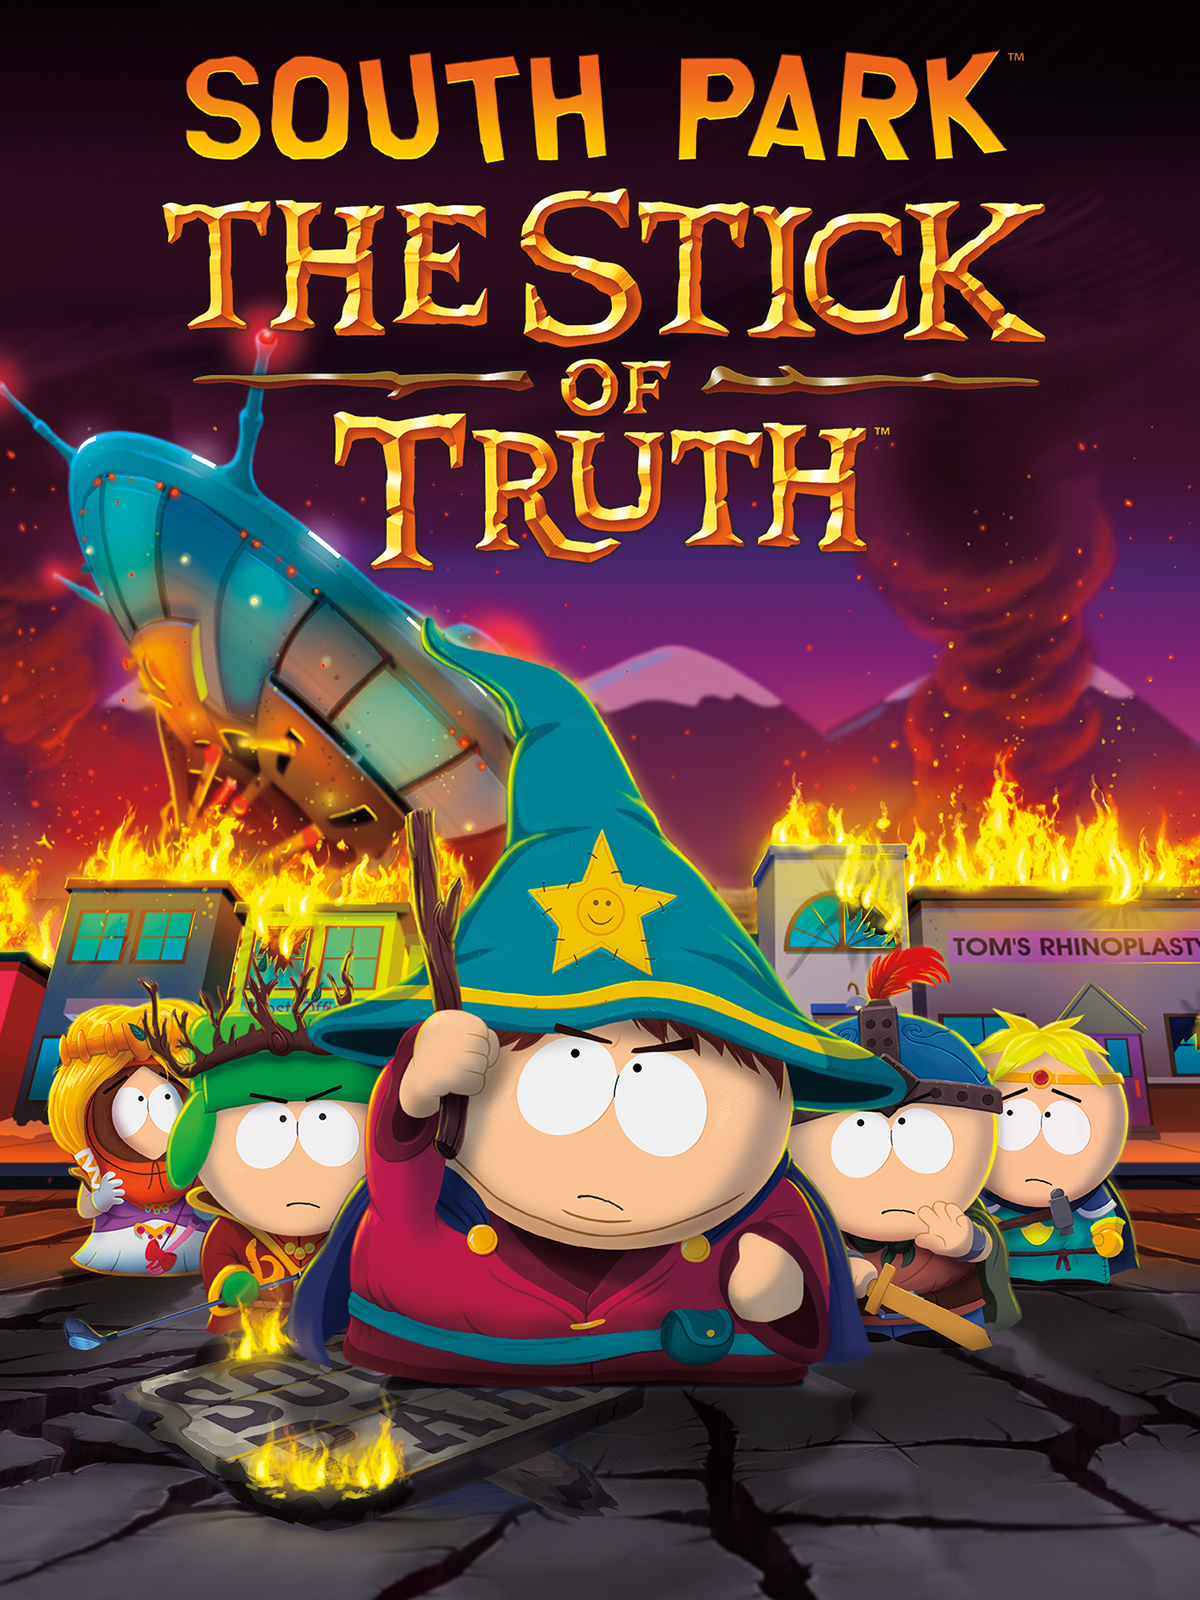 South Park: Stick of Truth (PS4 Digital Download) $7.50